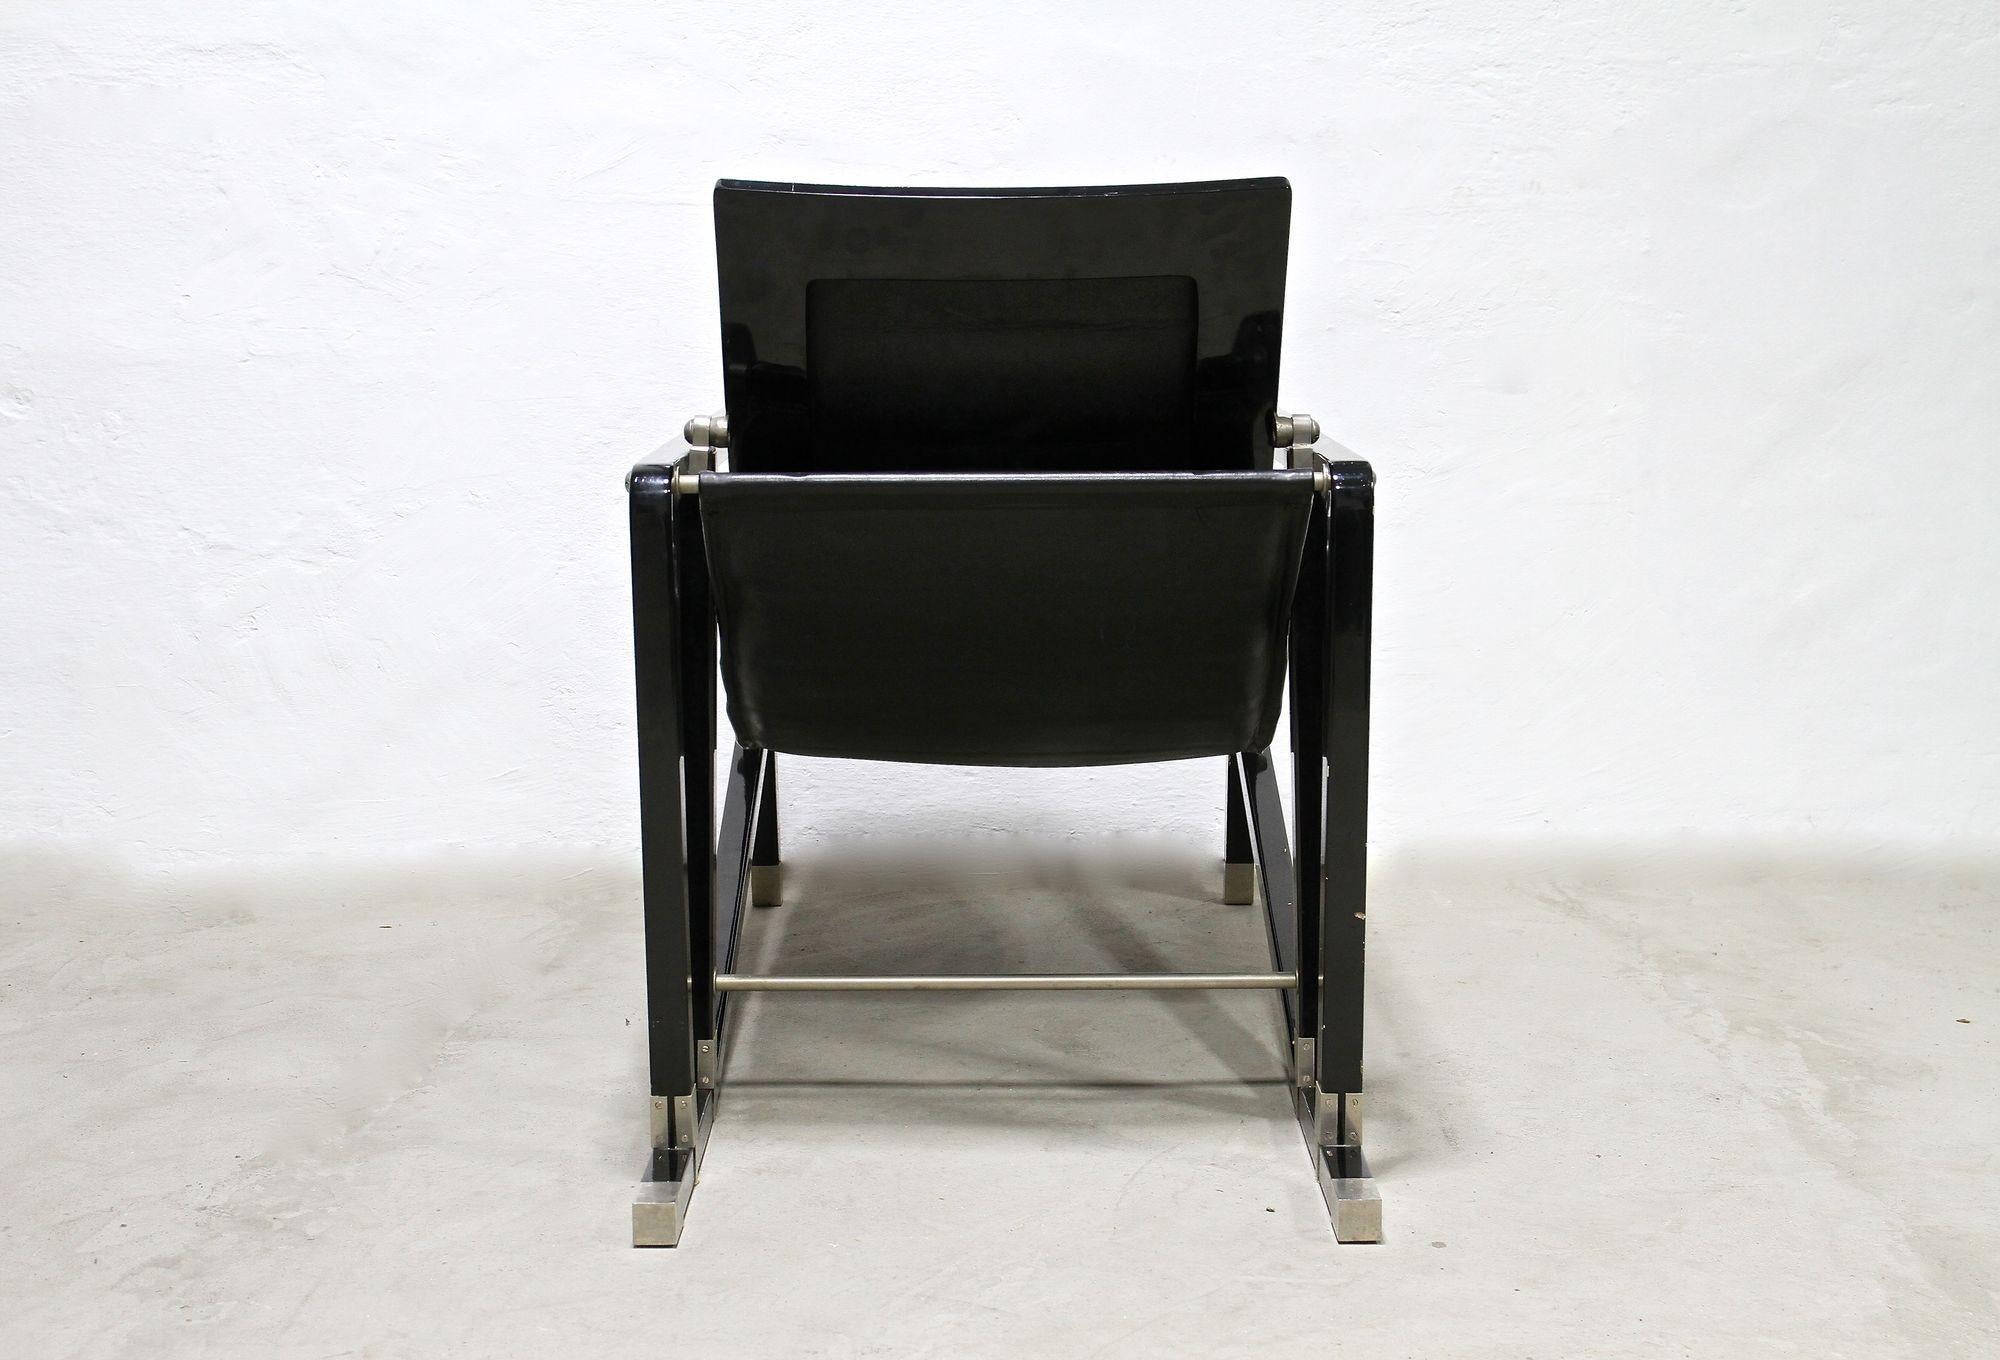 Transat Chair With Black Leather, Design Eileen Gray 1927, France ca. 1975 For Sale 4